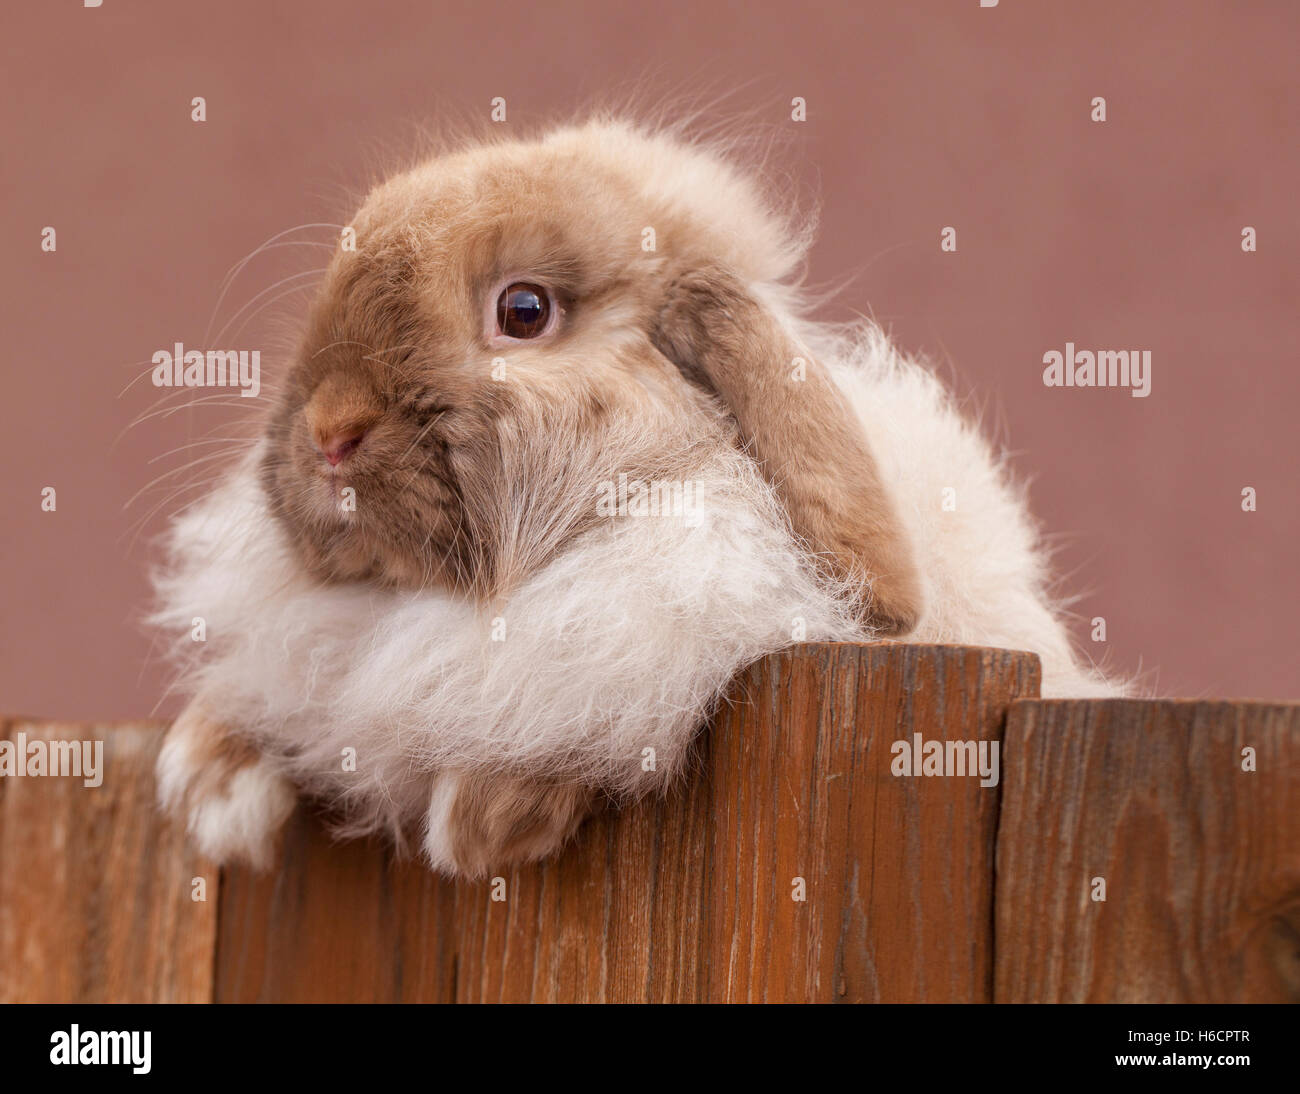 Cute Bunny Peaking Over The Fence Stock Photo